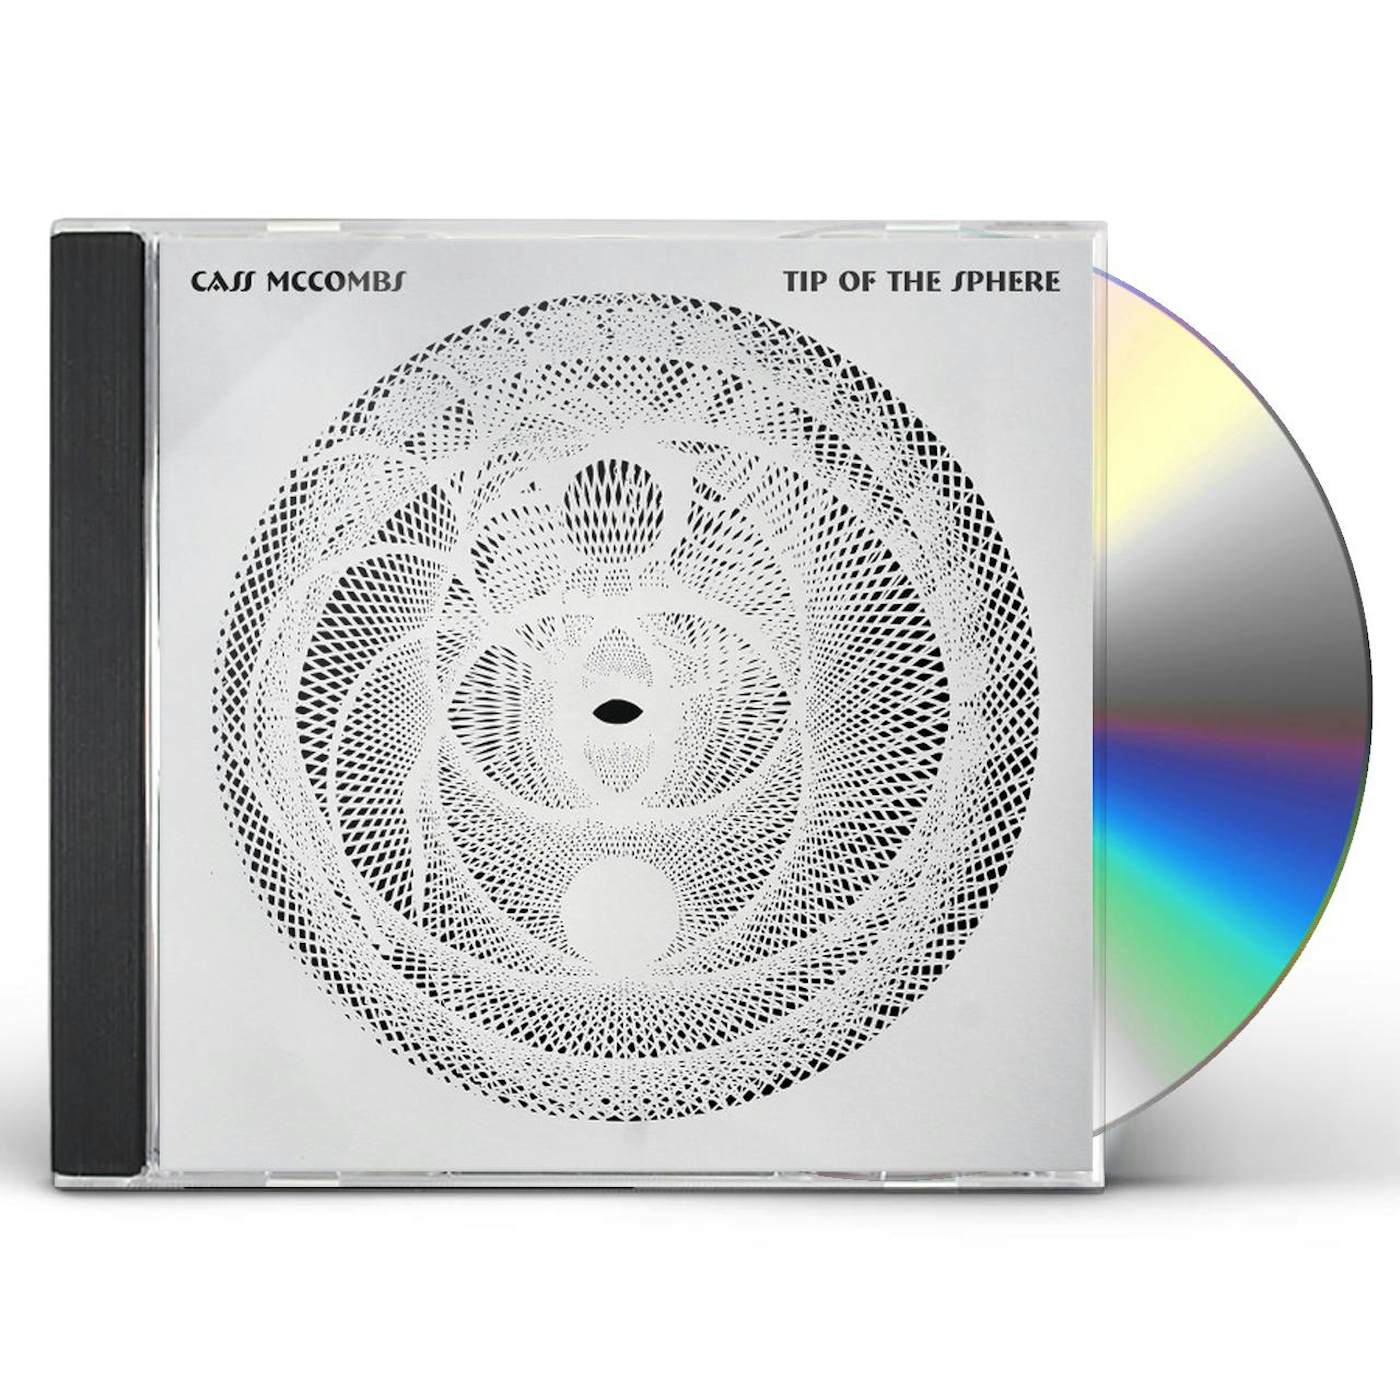 Cass McCombs TIP OF THE SPHERE CD